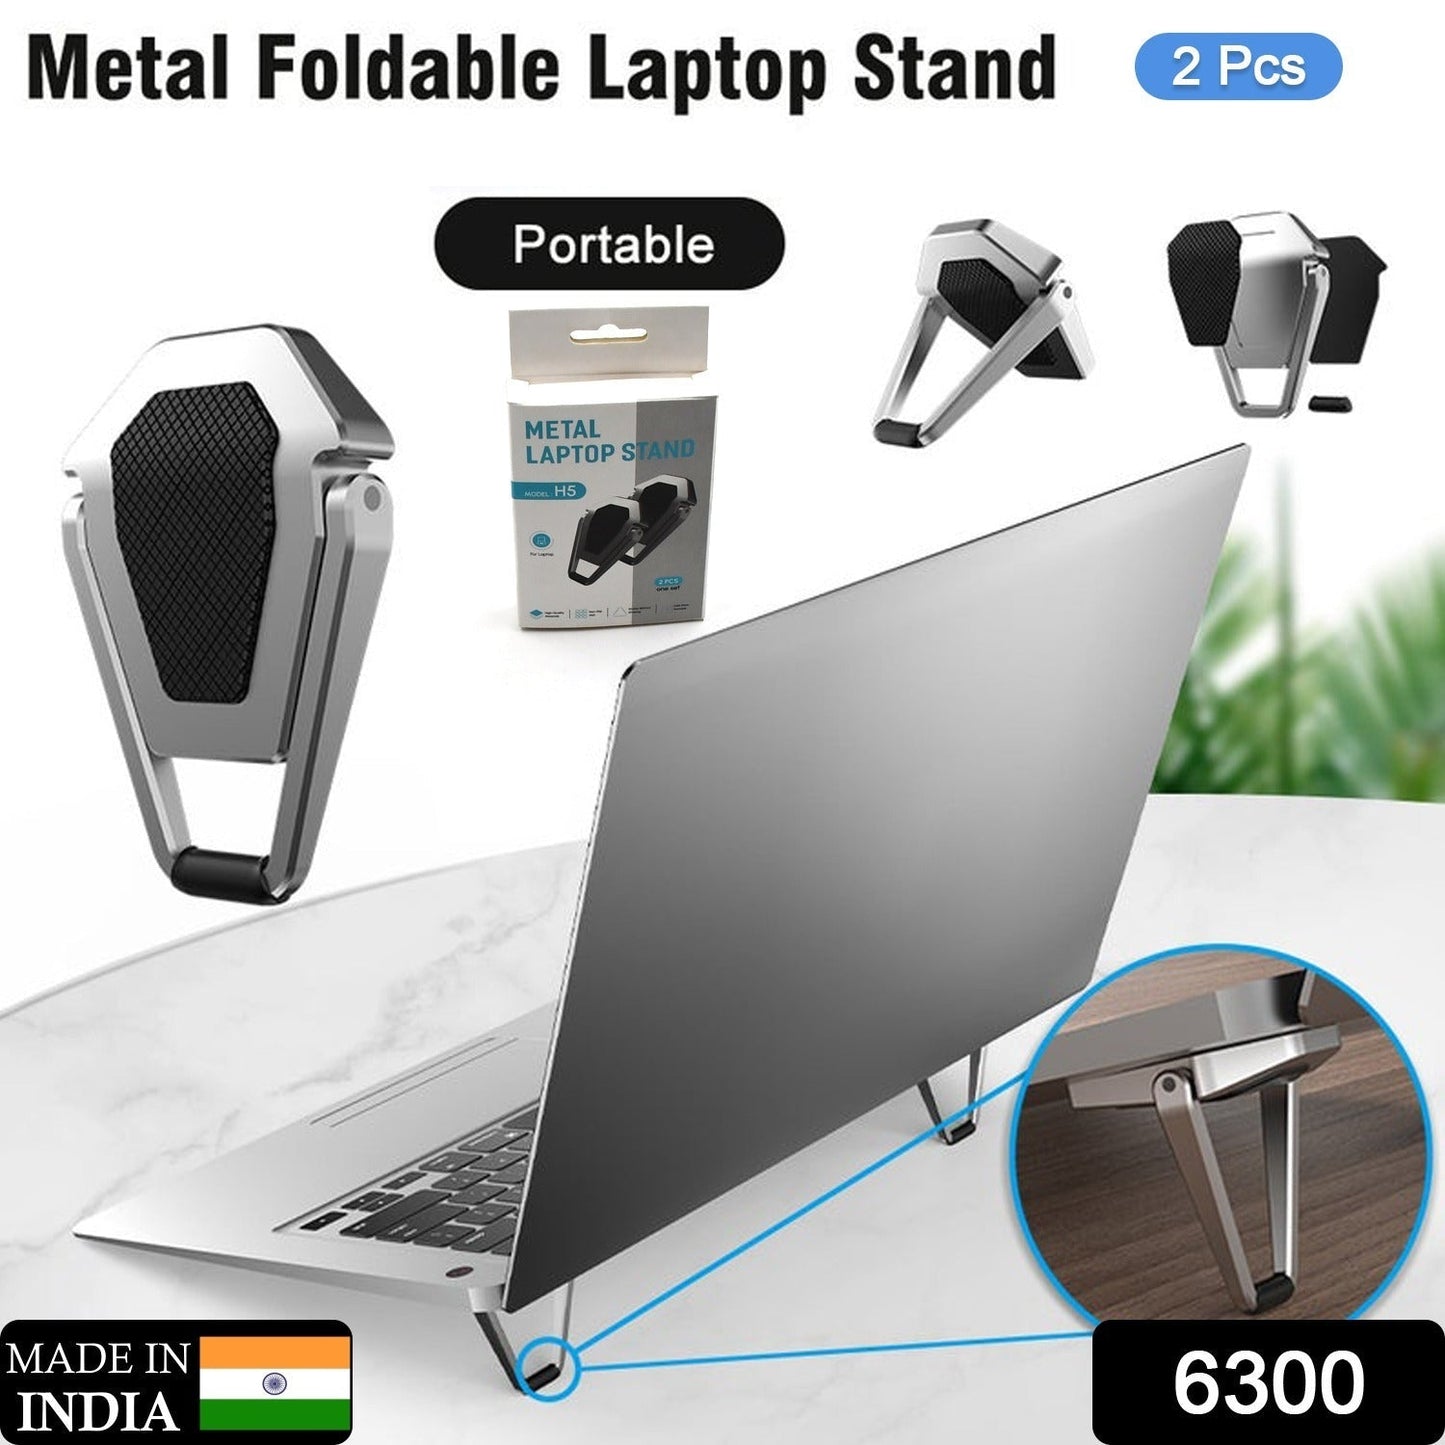 6300 Mini Premium Metal Folding Portable Stand Compatible with Every Laptop, Keyboard and Tablet